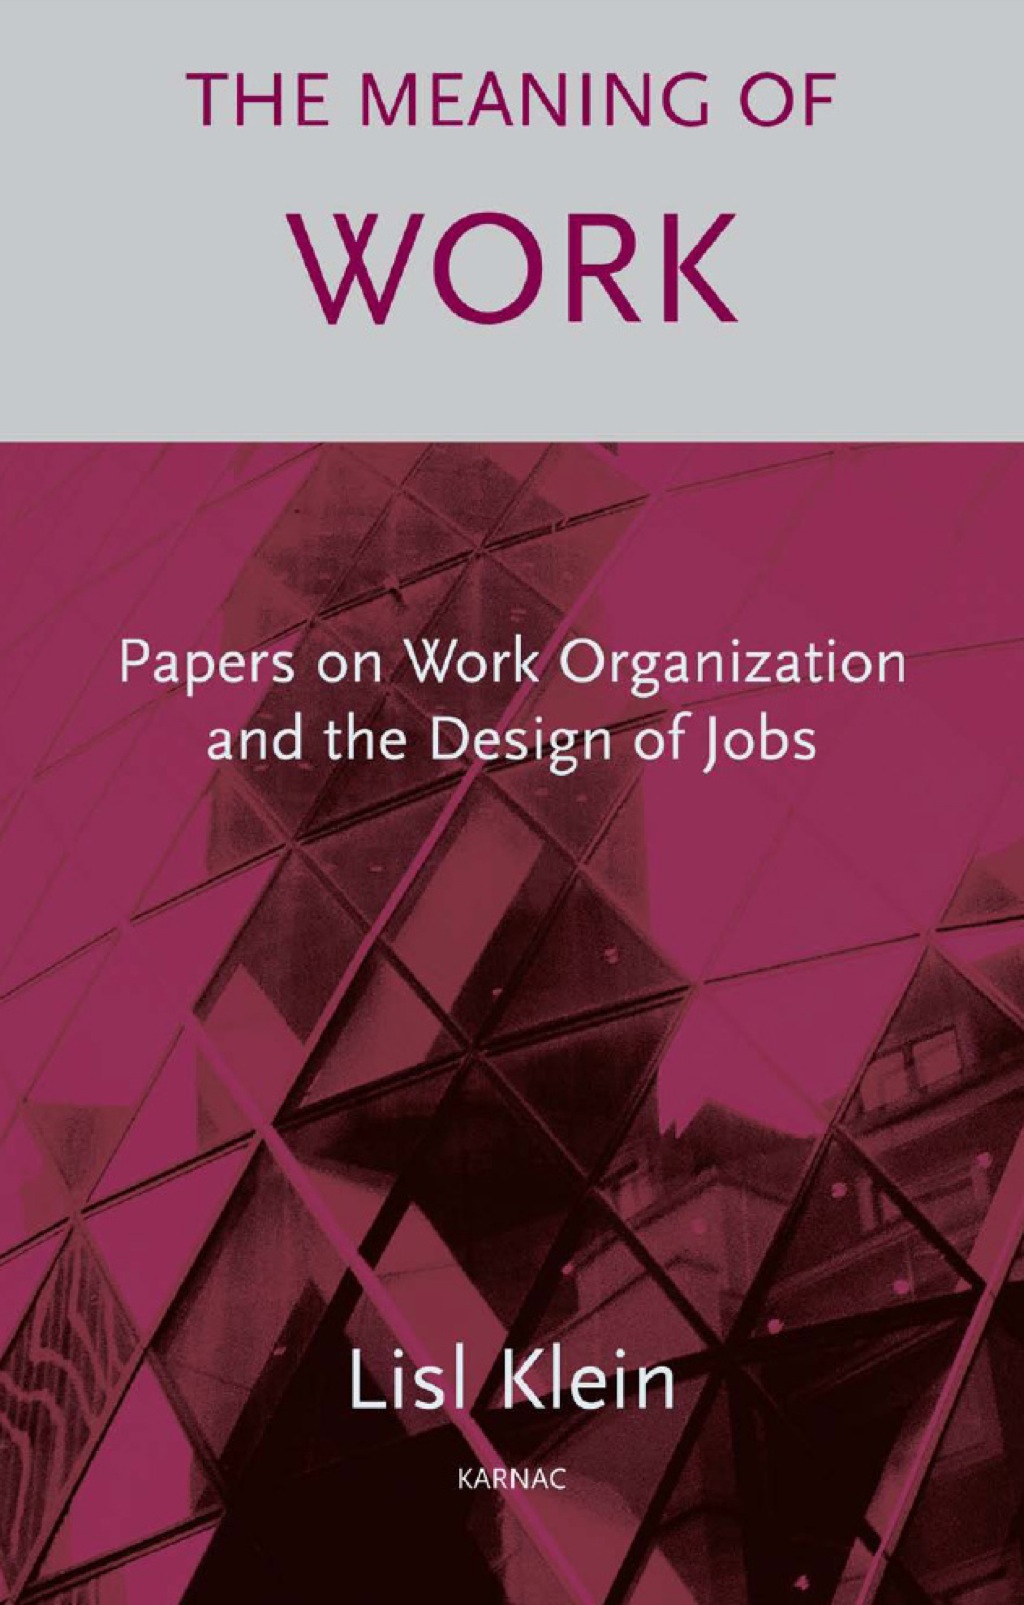 The Meaning of Work (eBook) - Lisl Klein,